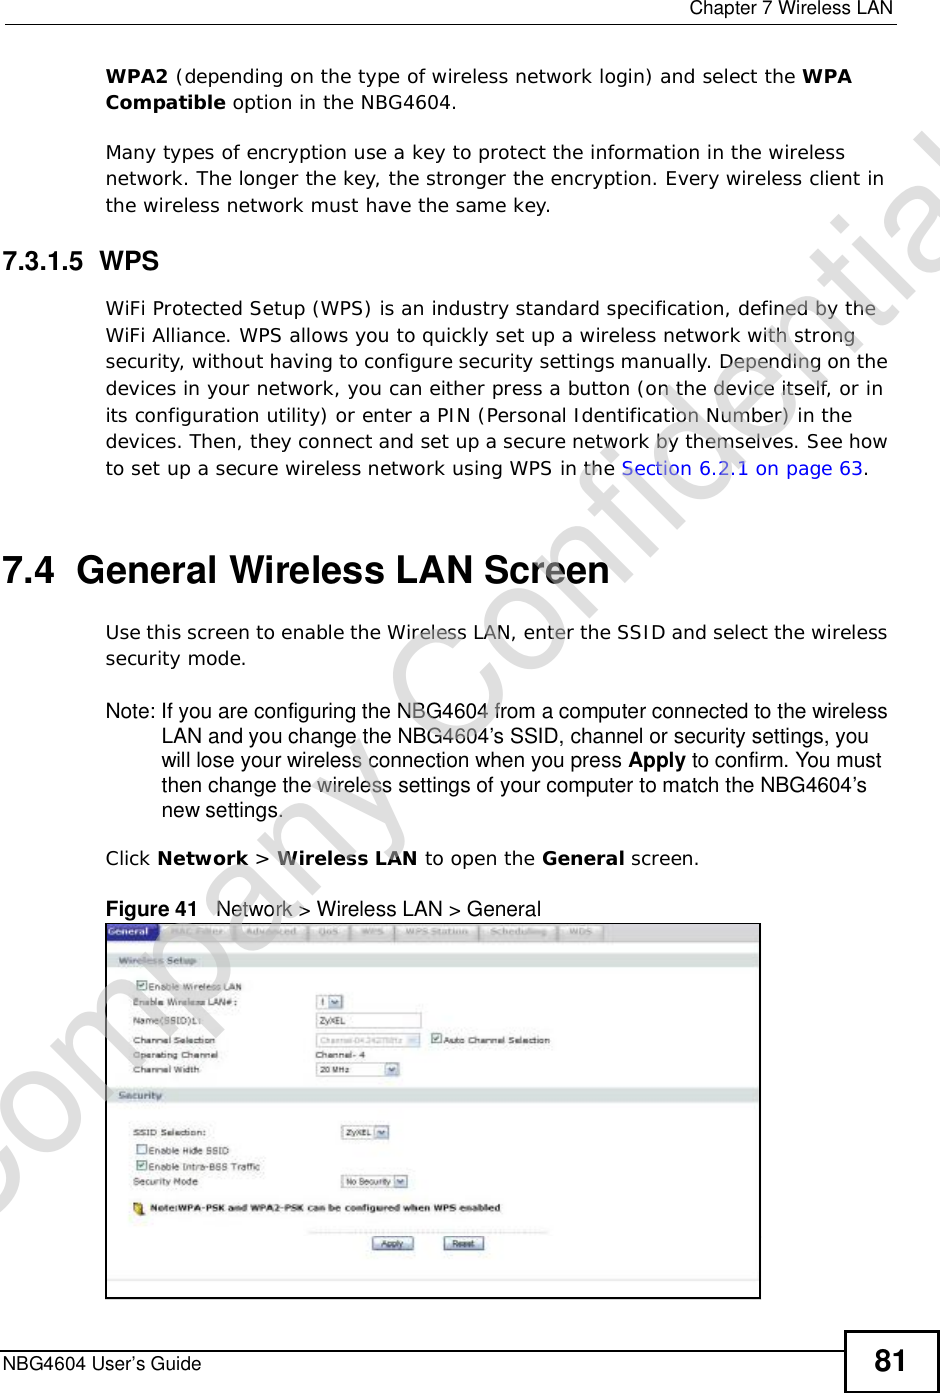  Chapter 7Wireless LANNBG4604 User’s Guide 81WPA2 (depending on the type of wireless network login) and select the WPACompatible option in the NBG4604.Many types of encryption use a key to protect the information in the wireless network. The longer the key, the stronger the encryption. Every wireless client in the wireless network must have the same key.7.3.1.5  WPSWiFi Protected Setup (WPS) is an industry standard specification, defined by the WiFi Alliance. WPS allows you to quickly set up a wireless network with strong security, without having to configure security settings manually. Depending on the devices in your network, you can either press a button (on the device itself, or in its configuration utility) or enter a PIN (Personal Identification Number) in the devices. Then, they connect and set up a secure network by themselves. See how to set up a secure wireless network using WPS in the Section 6.2.1 on page 63.7.4  General Wireless LAN Screen Use this screen to enable the Wireless LAN, enter the SSID and select the wireless security mode.Note: If you are configuring the NBG4604 from a computer connected to the wireless LAN and you change the NBG4604’s SSID, channel or security settings, you will lose your wireless connection when you press Apply to confirm. You must then change the wireless settings of your computer to match the NBG4604’s new settings.Click Network &gt; Wireless LAN to open the General screen.Figure 41   Network &gt; Wireless LAN &gt; General Company Confidential